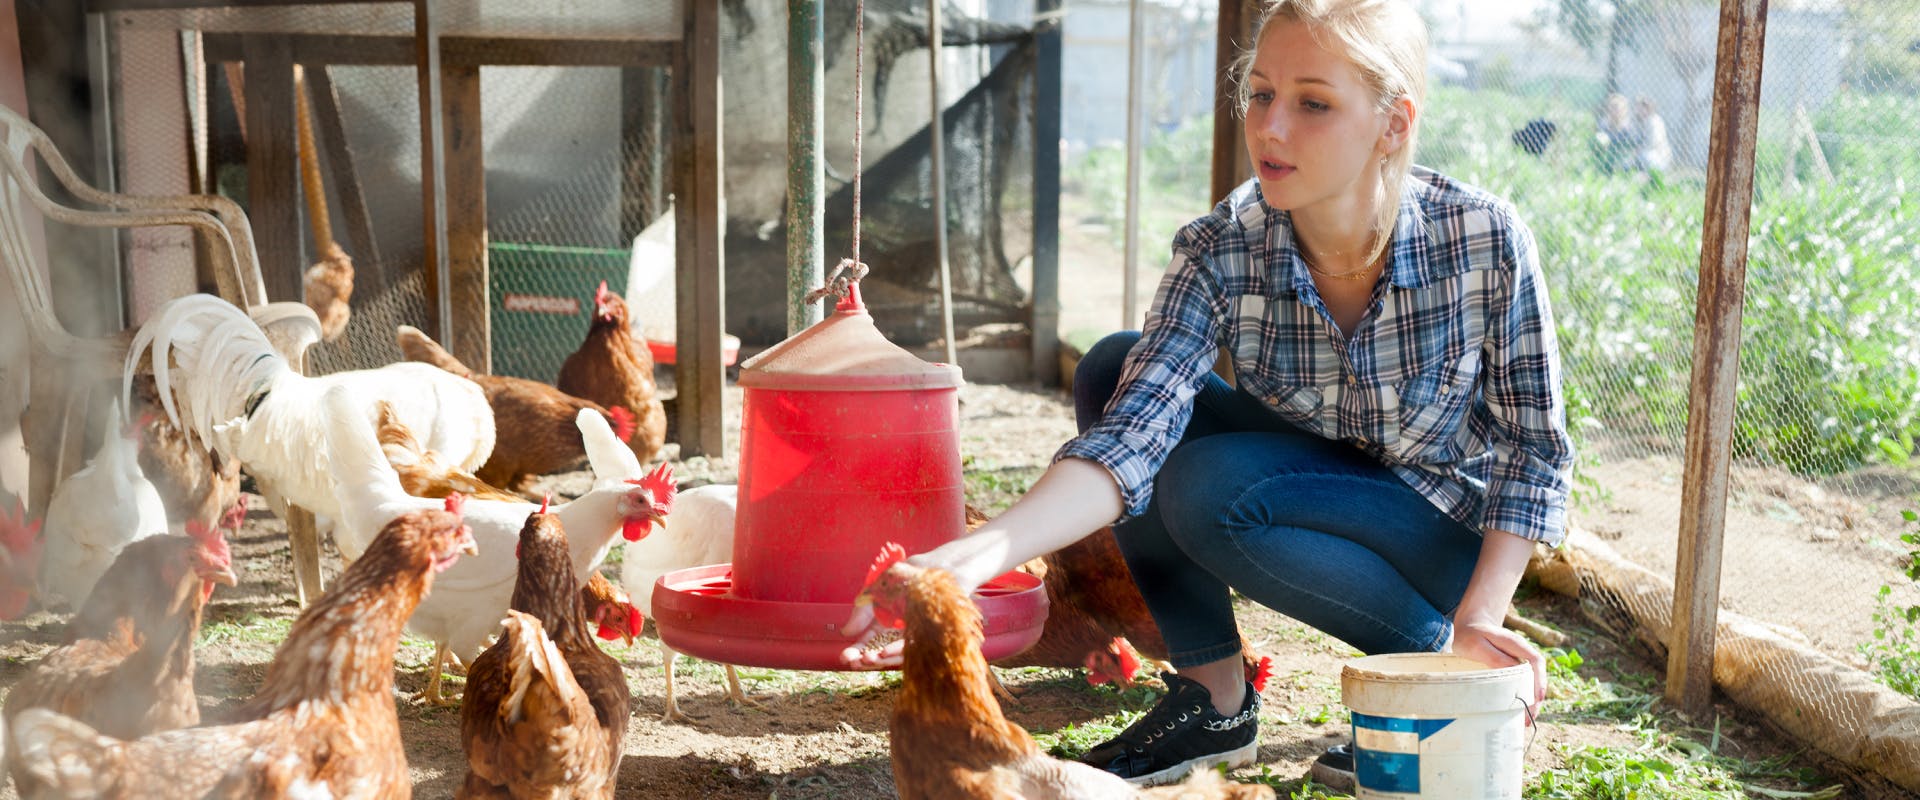 a woman pet sitting farm animals feeding a flock of chickens in a chicken coop